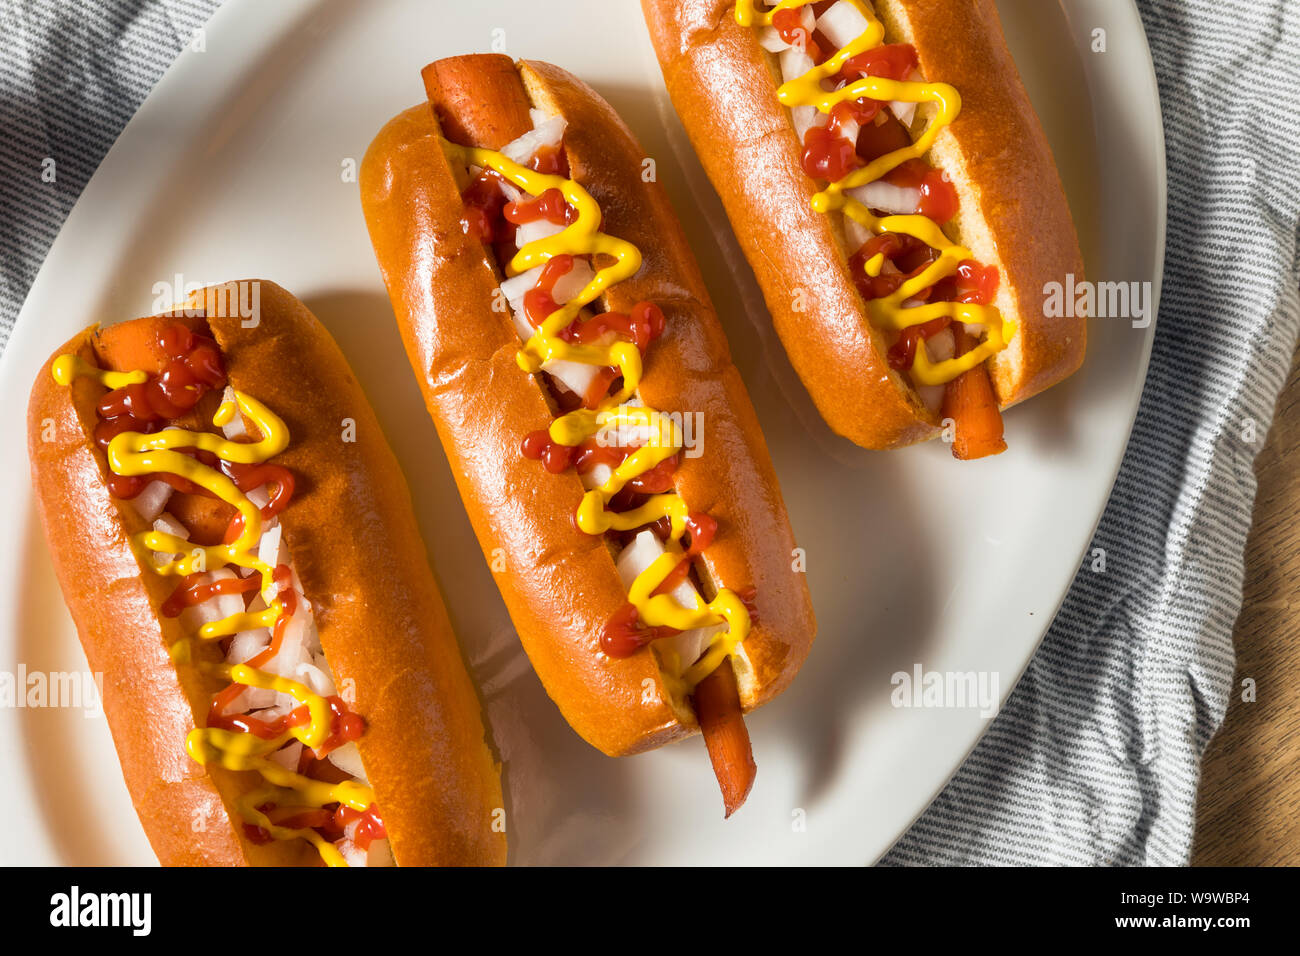 Homemade Vegan Carrot Hot Dogs with Onion and Mustard Stock Photo